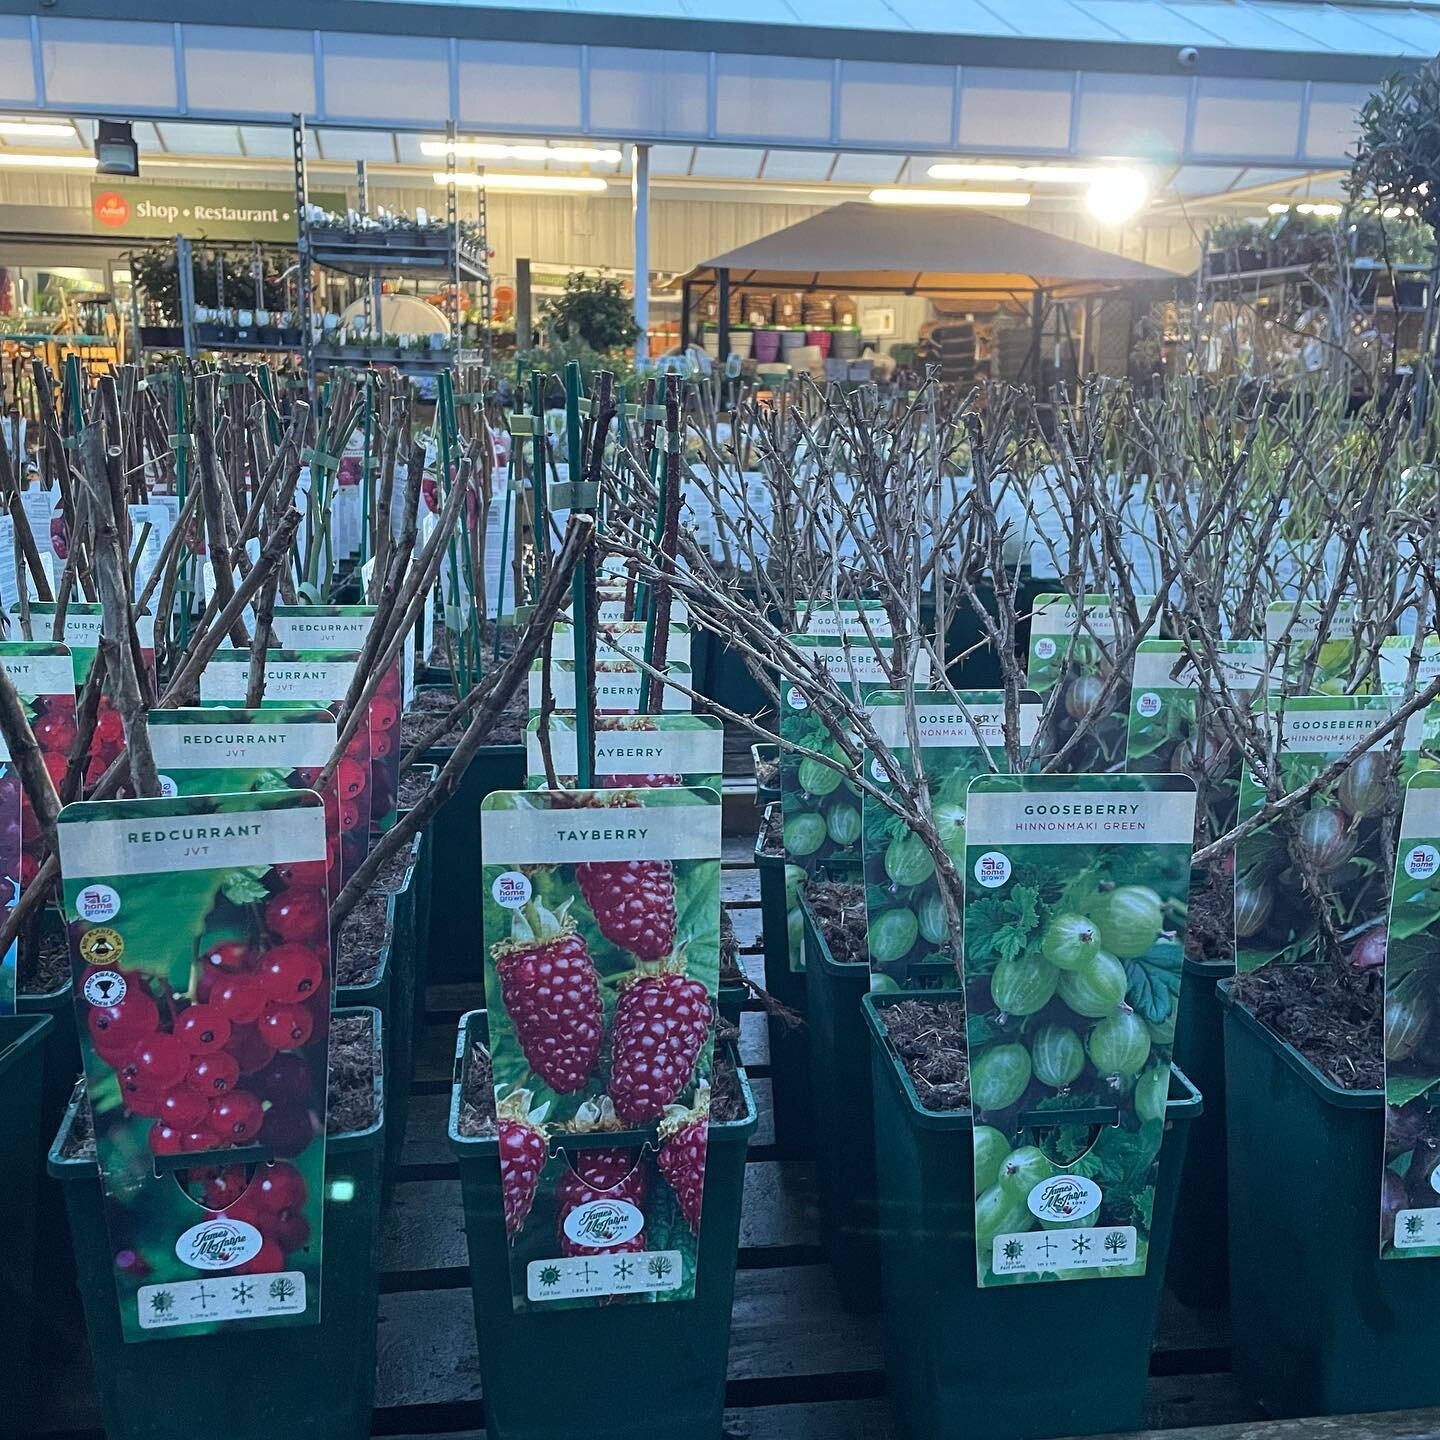 Lots of Soft Fruit in today! 

Why not try a blueberry or currant bush and have some lovely berries through summer 

#growyourown #ansellgc #gardencentres #garden #gardening #summer #fruit #berries